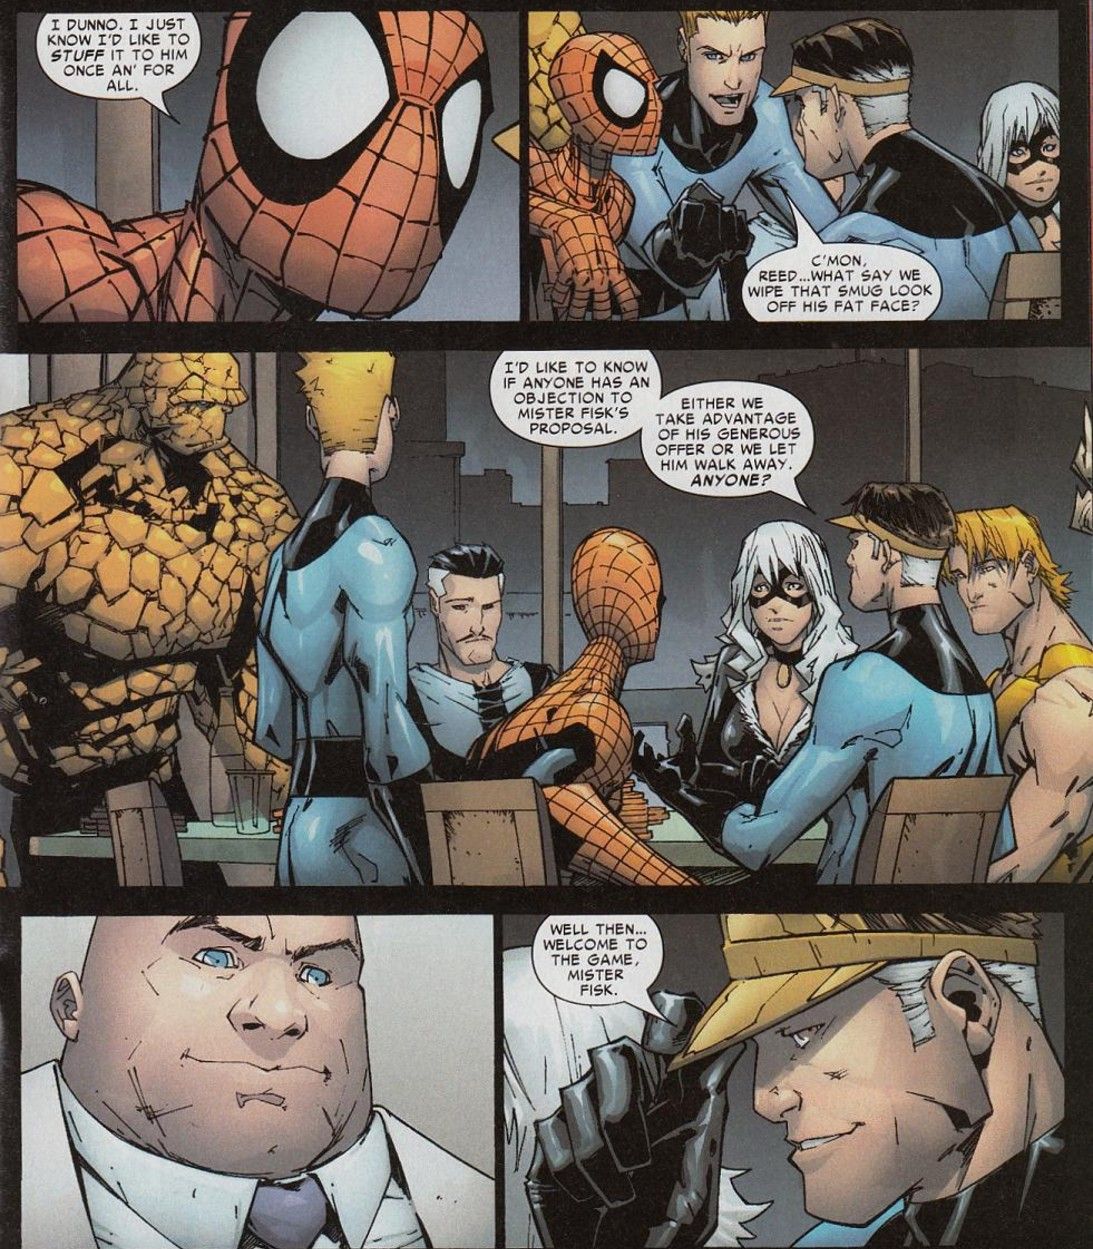 The Kingpin is invited to play poker by the marvel heroes